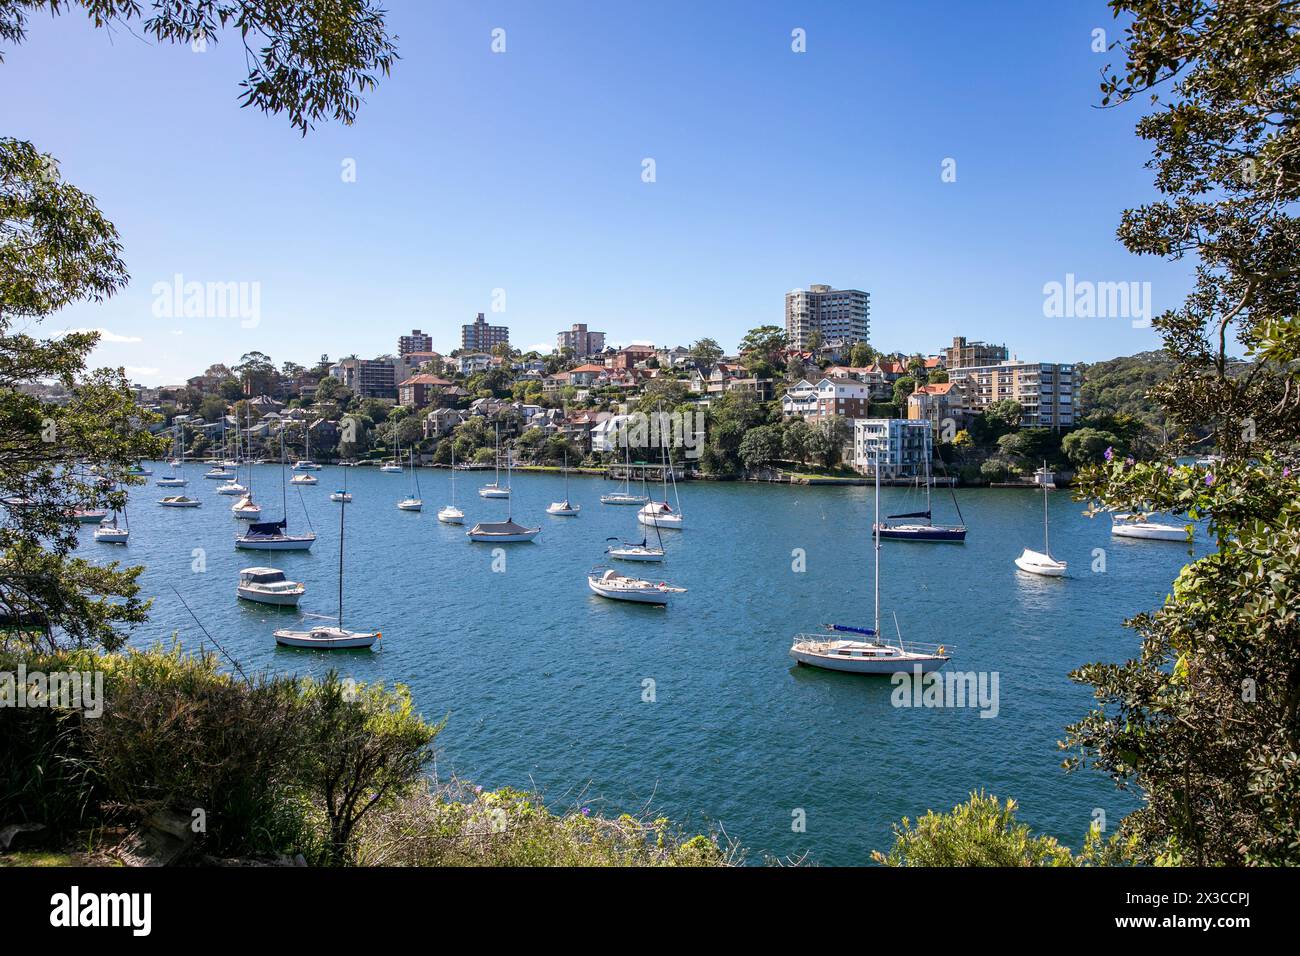 Sail boats and yachts moored in Mosman Bay on Sydney lower north shore, with waterfront homes in Mosman,Sydney,NSW,Australia Stock Photo